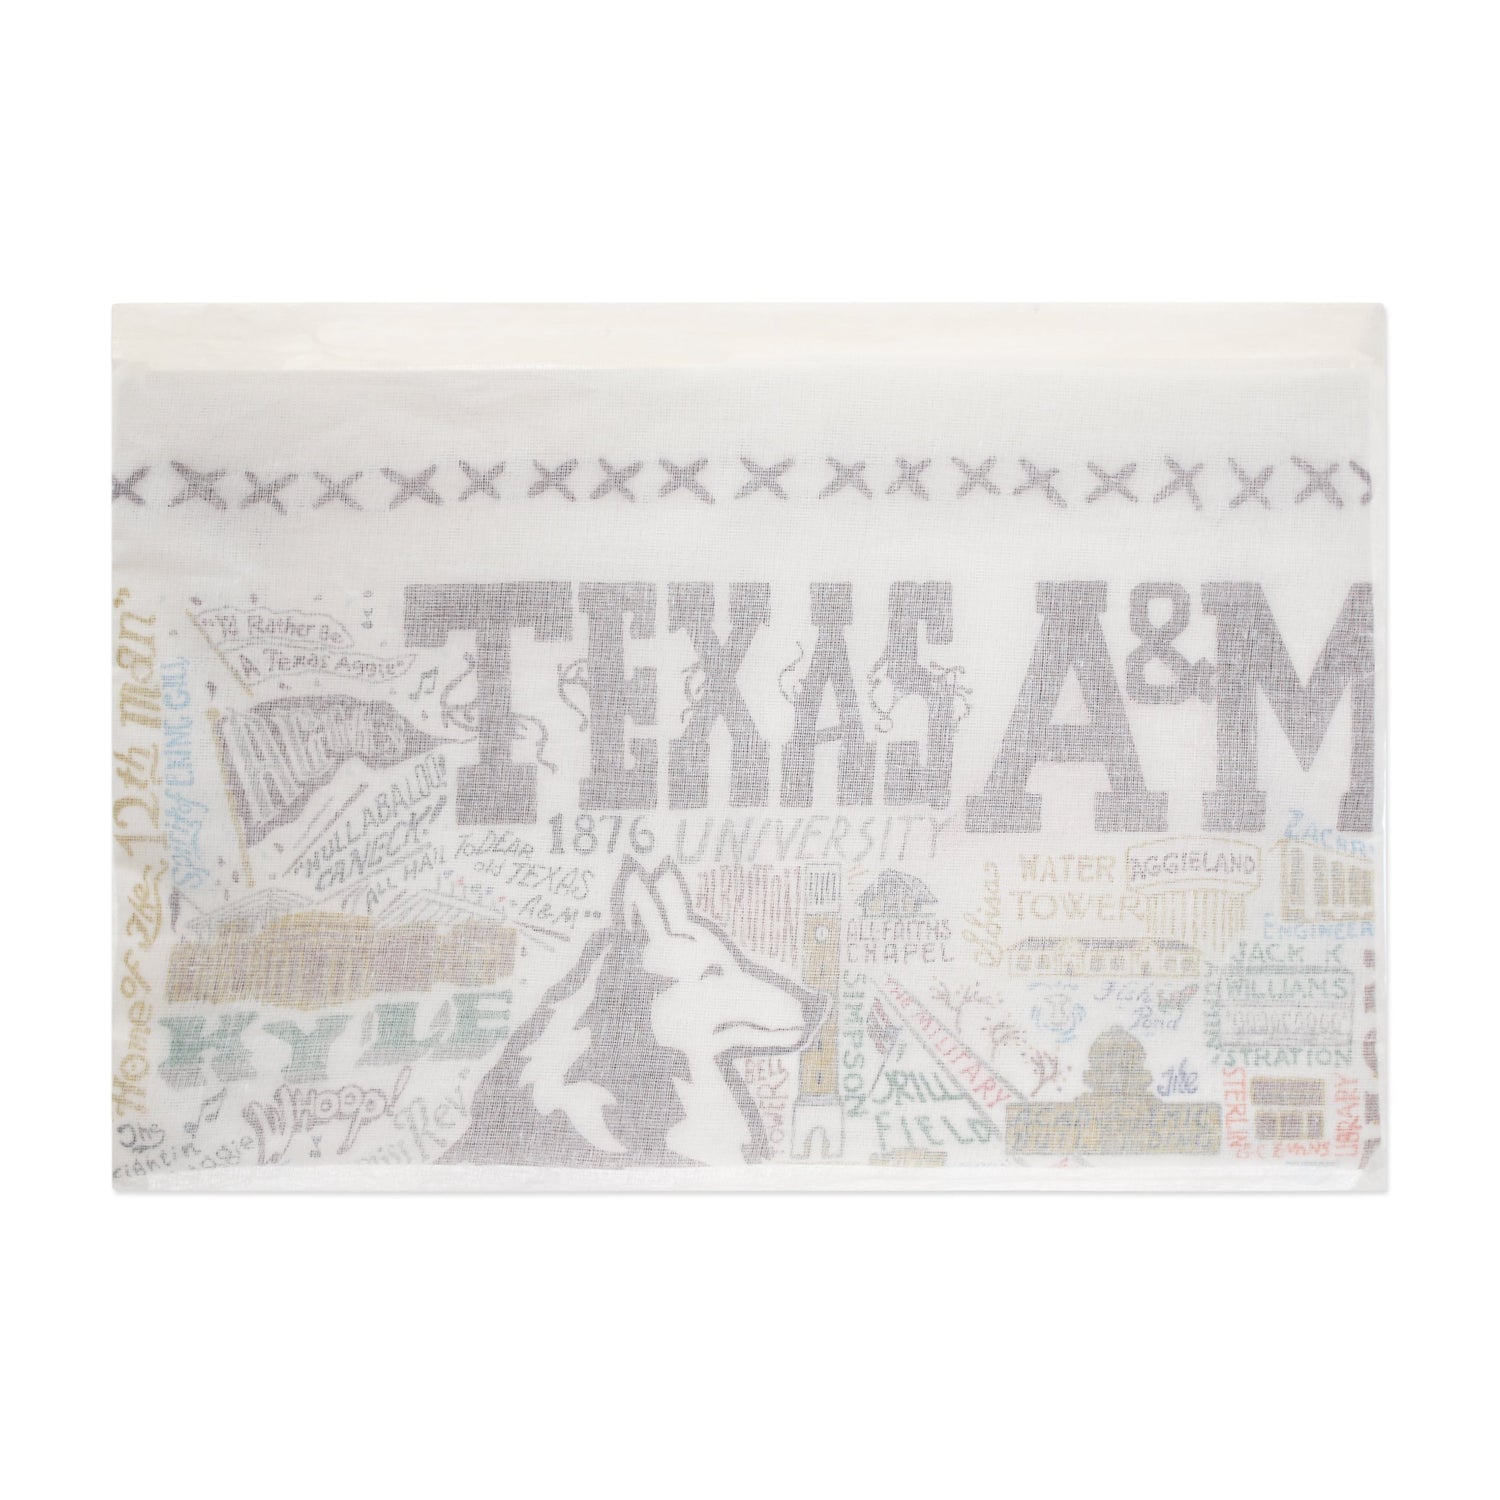 Texas A&M Catstudio Embroidered Dish Towel